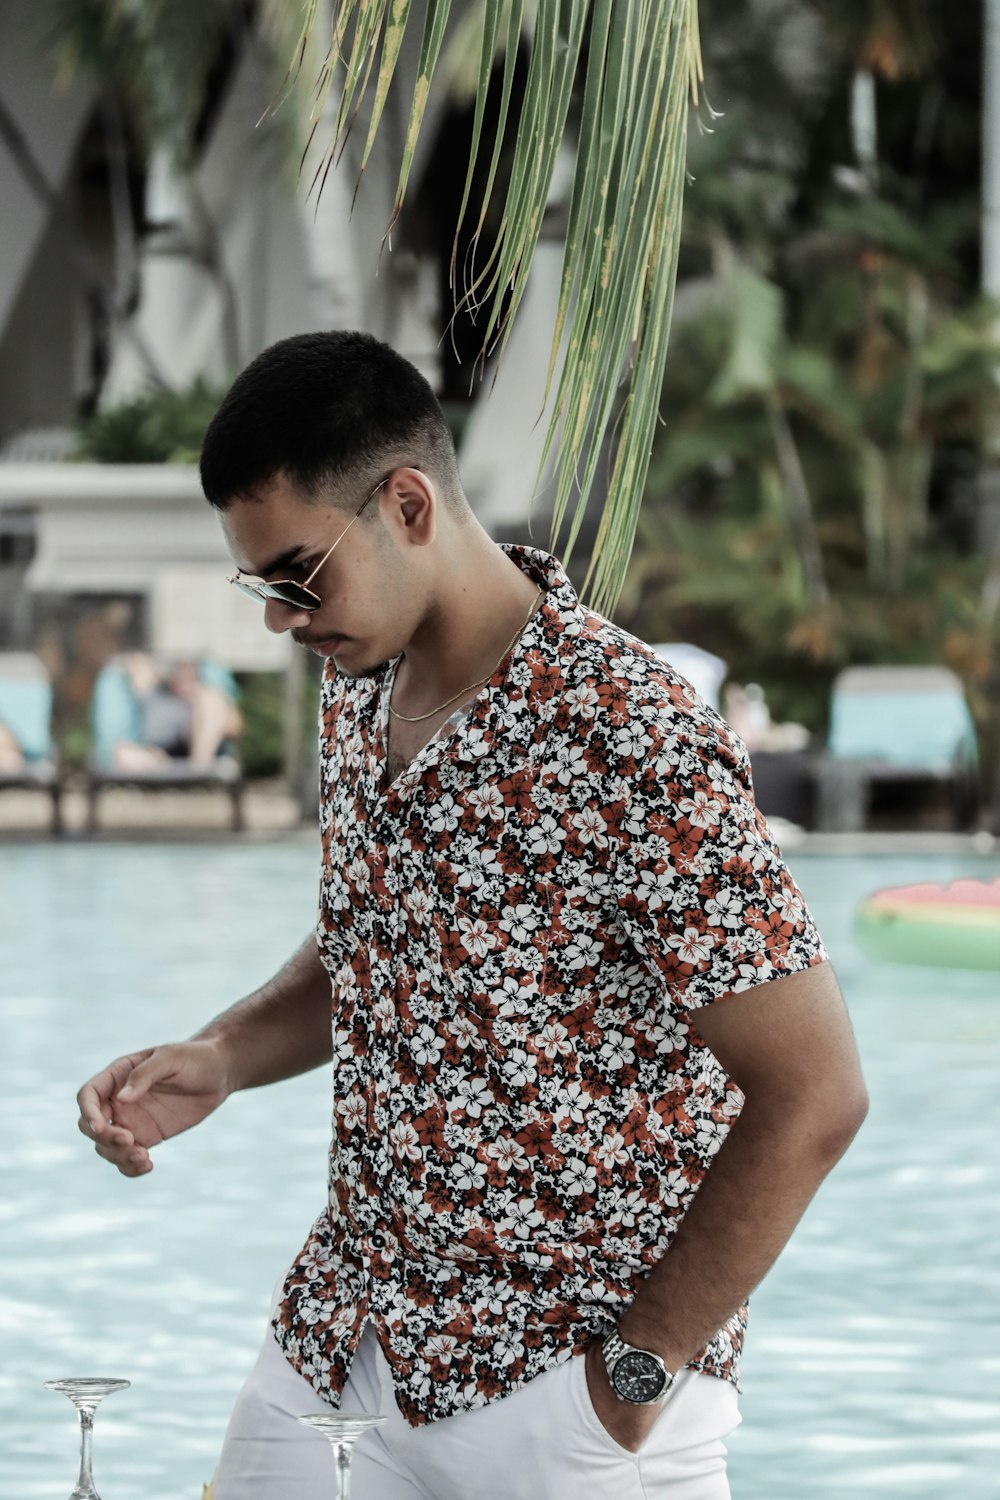 a man standing next to a pool wearing sunglasses